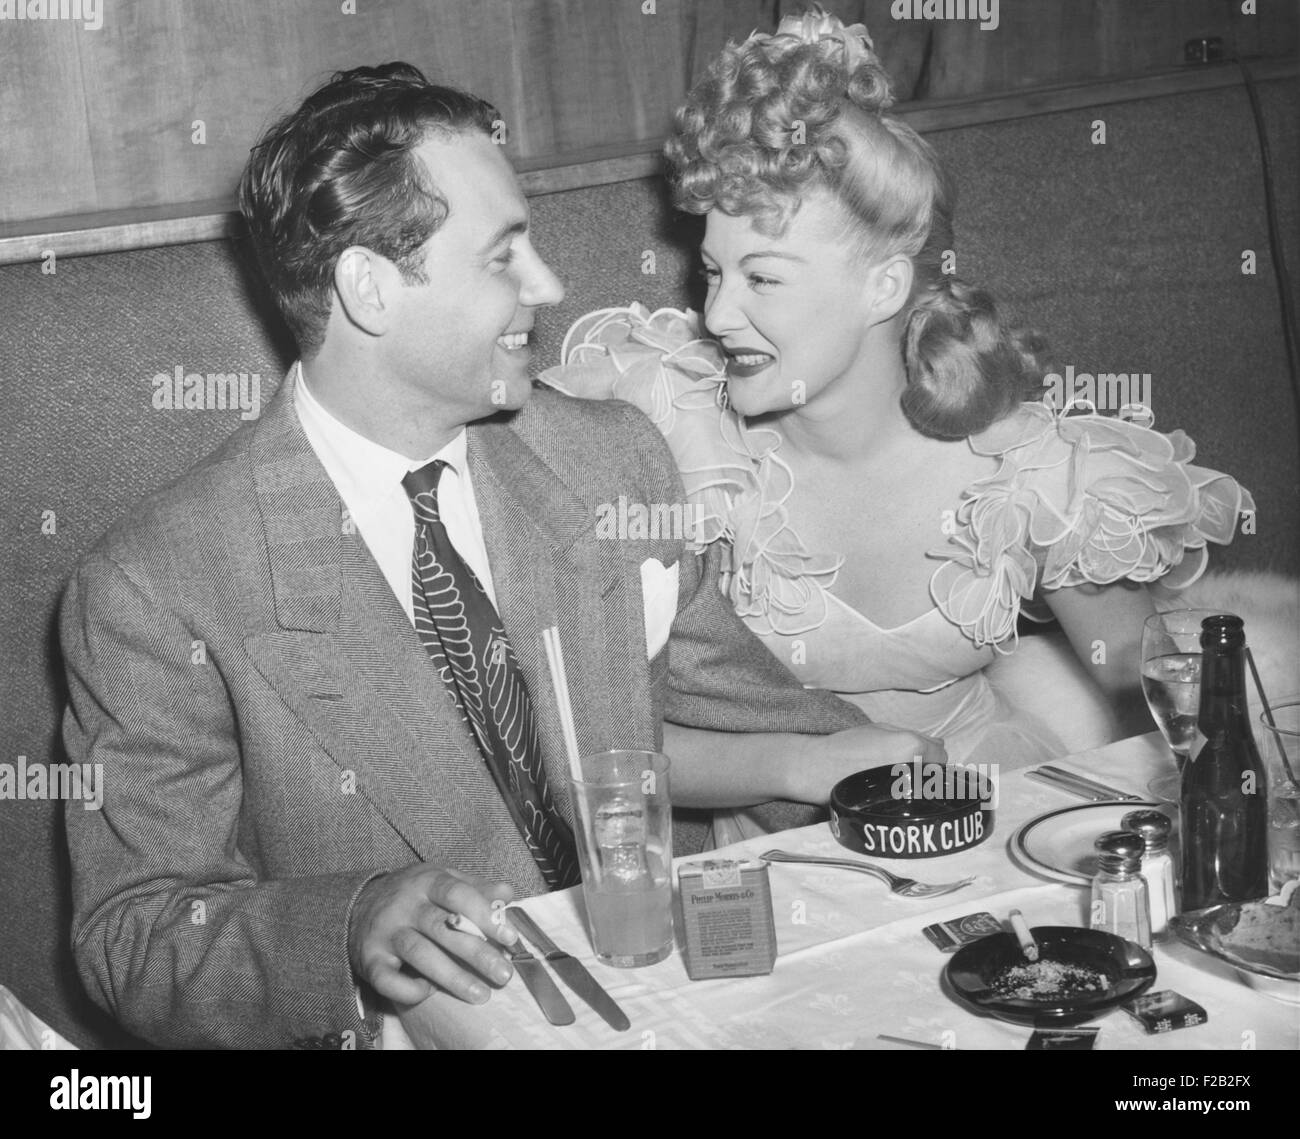 Movie star Betty Hutton with her fiance, newscaster, in Charles Martin at the Stock Club. New York City, Sept. 2, 1943. They never wed, instead she married Ted Briskin on Sept. 3, 1945. (CSU 2015 7 356) Stock Photo